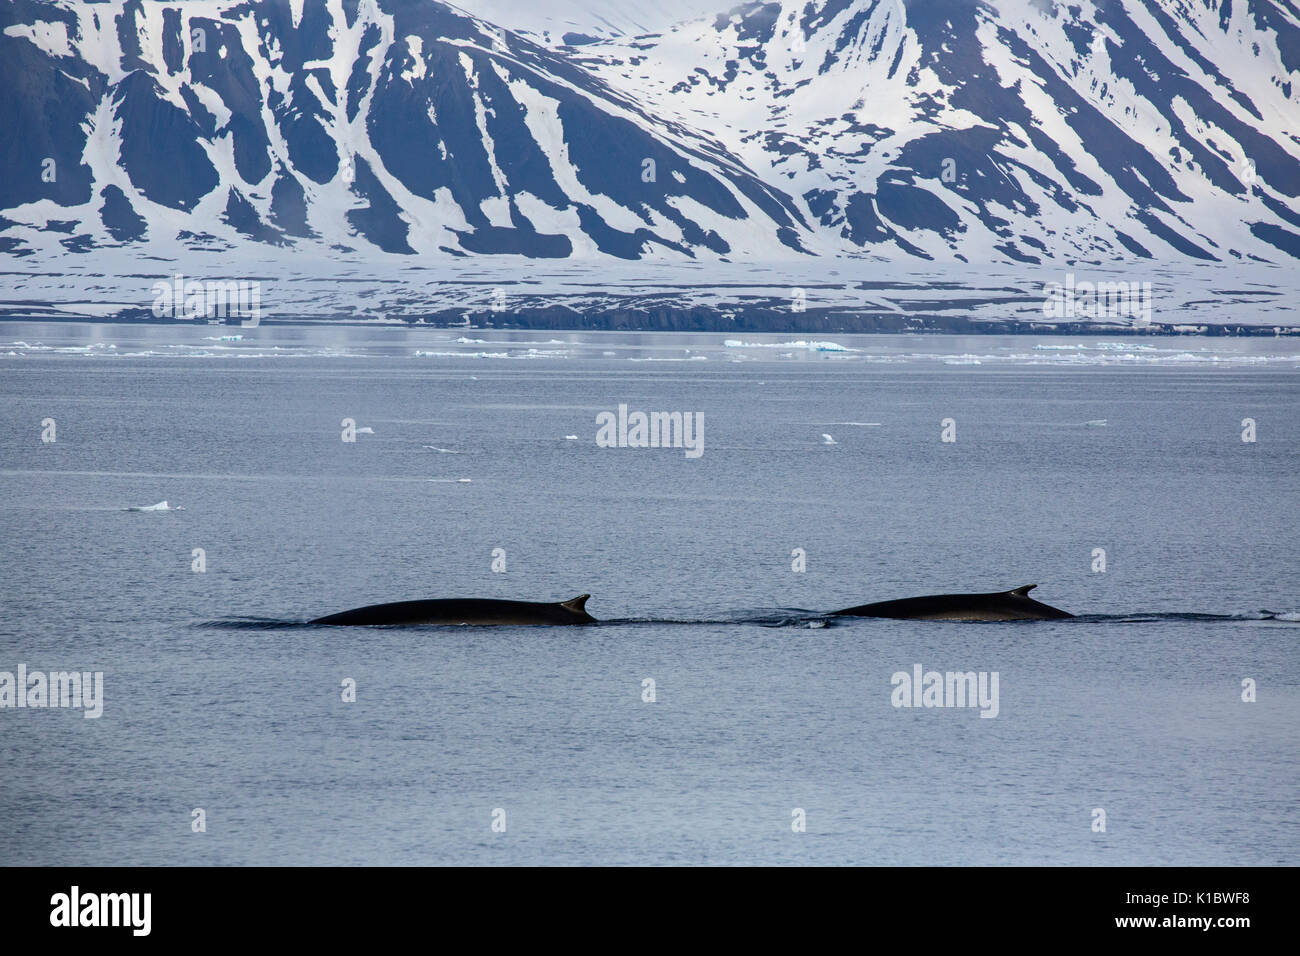 Fin Whales, Balaenoptera physalus, two adults swimming against back drop of snow covered mountains. Taken in June, Spitsbergen, Svalbard, Norway Stock Photo